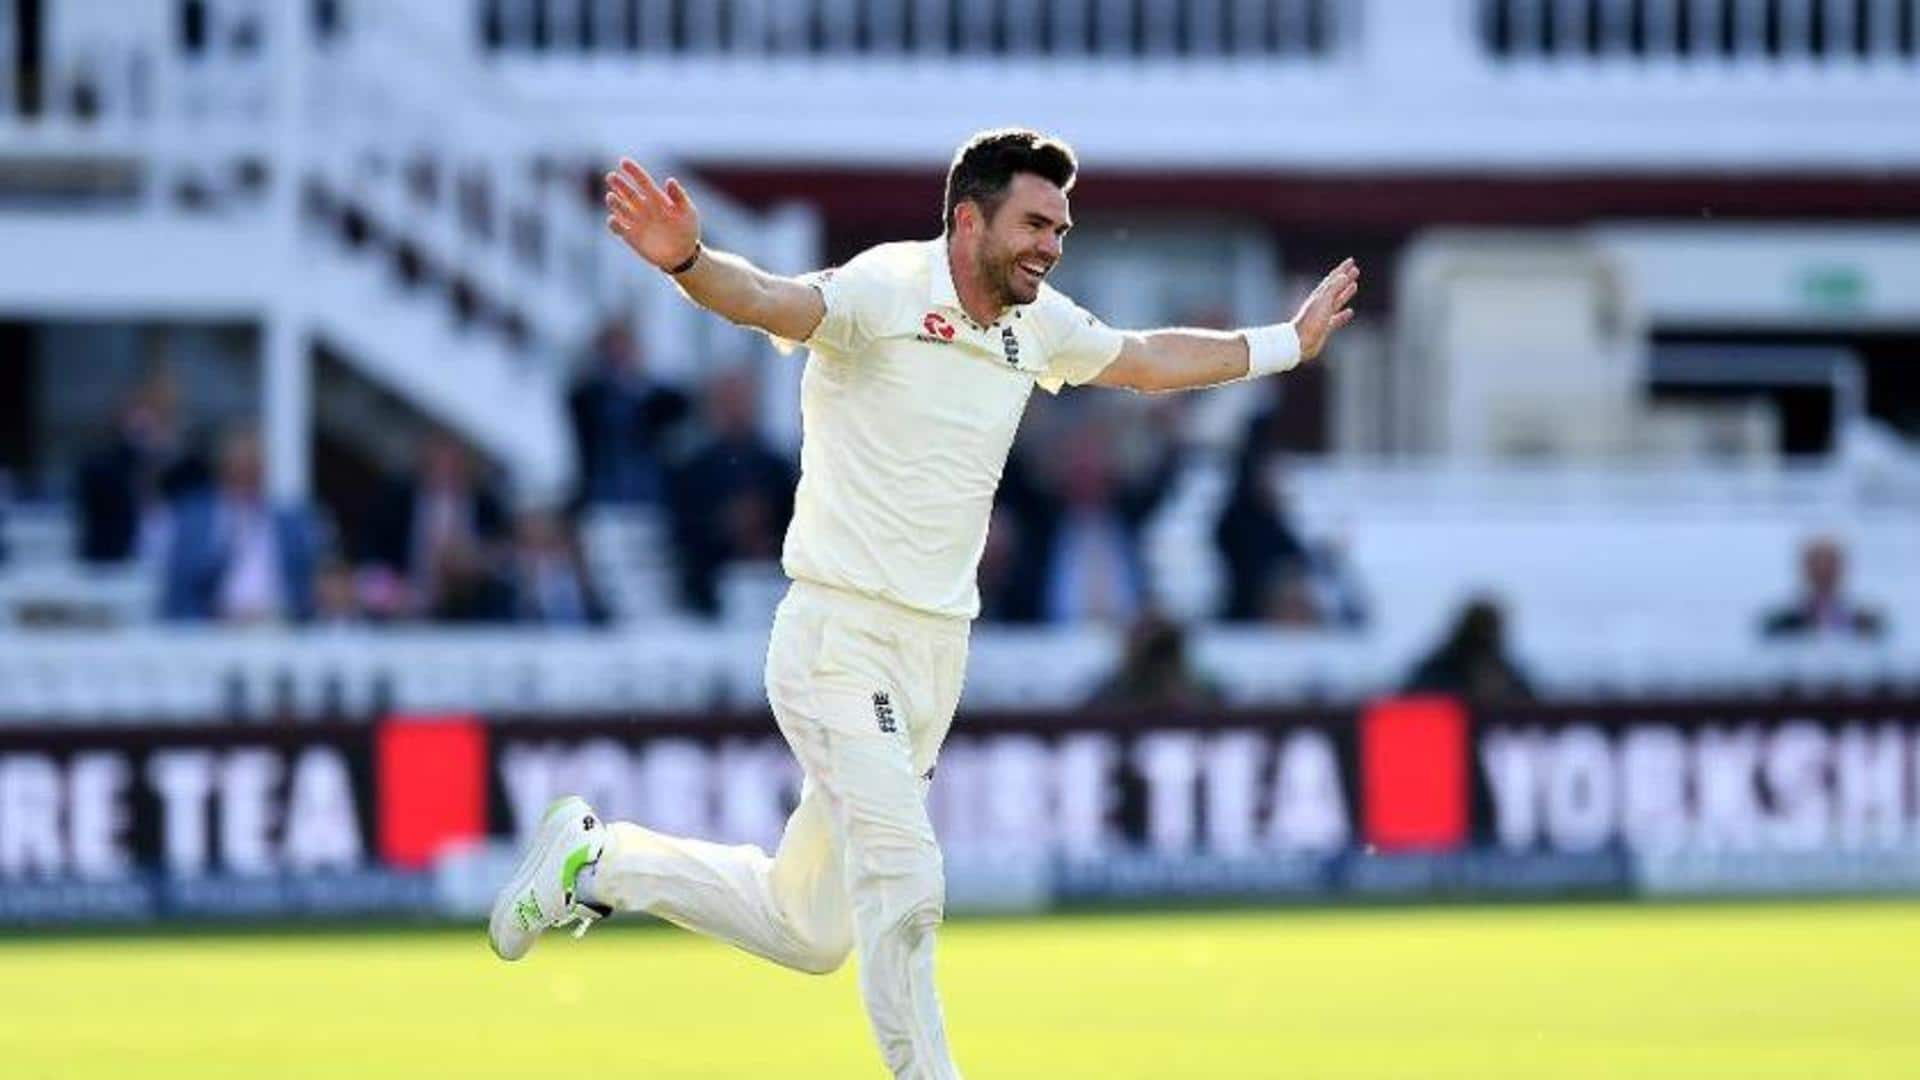 James Anderson scripts history, becomes number one ranked Test bowler